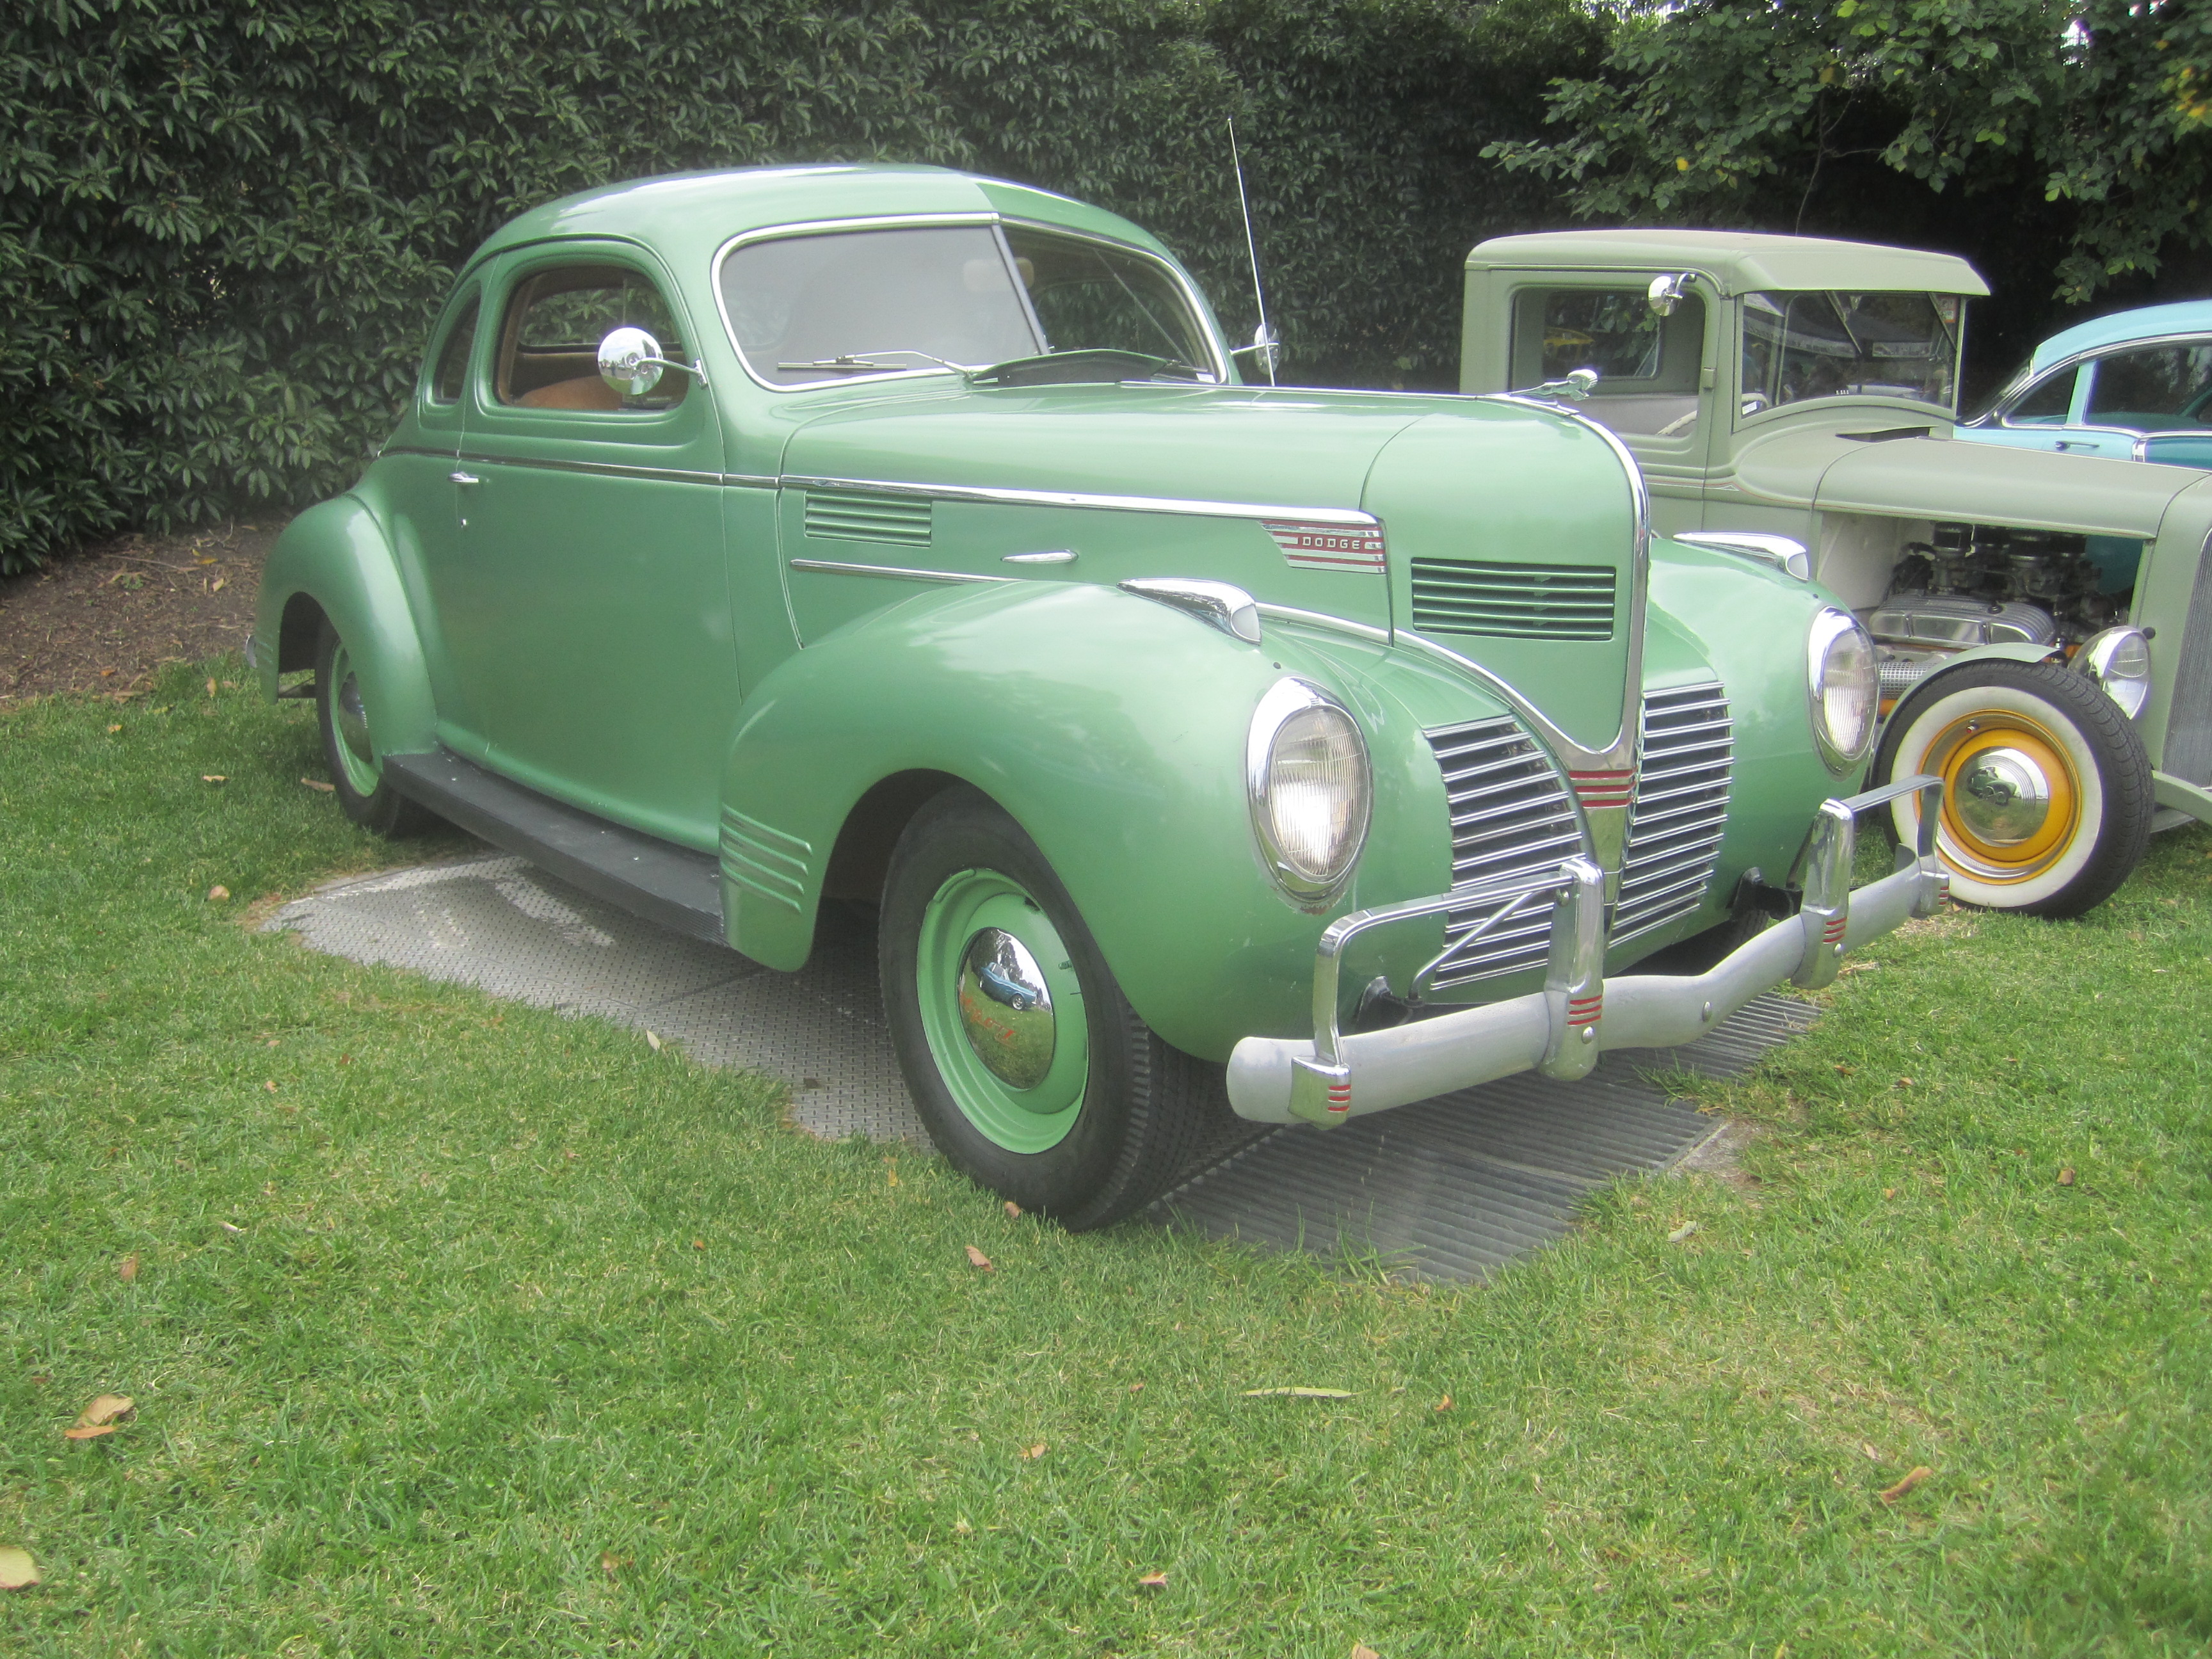 File:1939 Dodge Luxury Liner Coupe.jpg - Wikimedia Commons